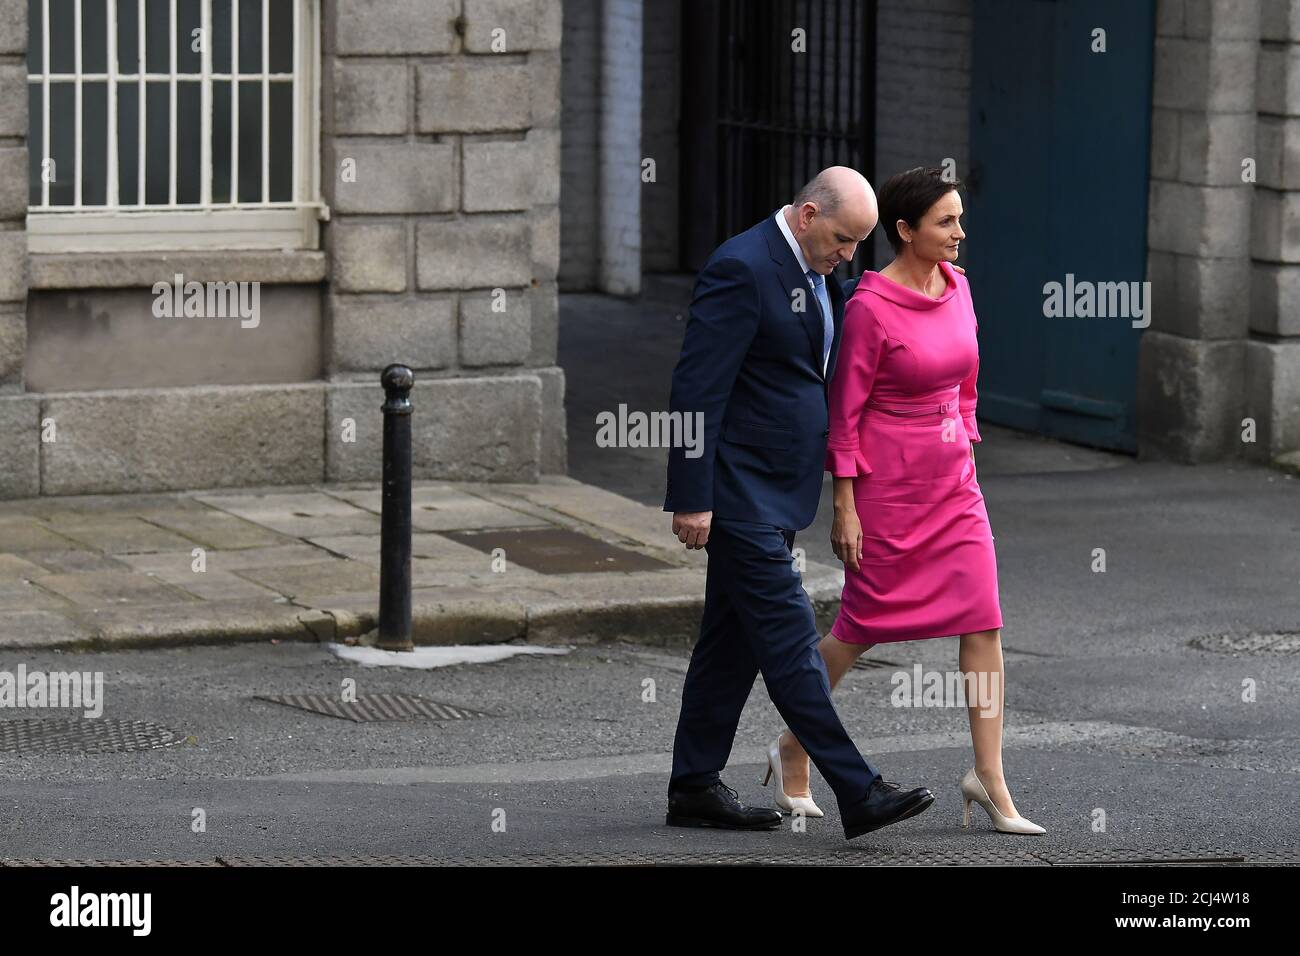 Candidate Sean Gallagher arrives with his wife Patricia Gallagher at Dublin Castle central count centre for the Irish presidential election and the blasphemy referendum in Dublin, Ireland, October 27, 2018. REUTERS/Clodagh Kilcoyne Stock Photo